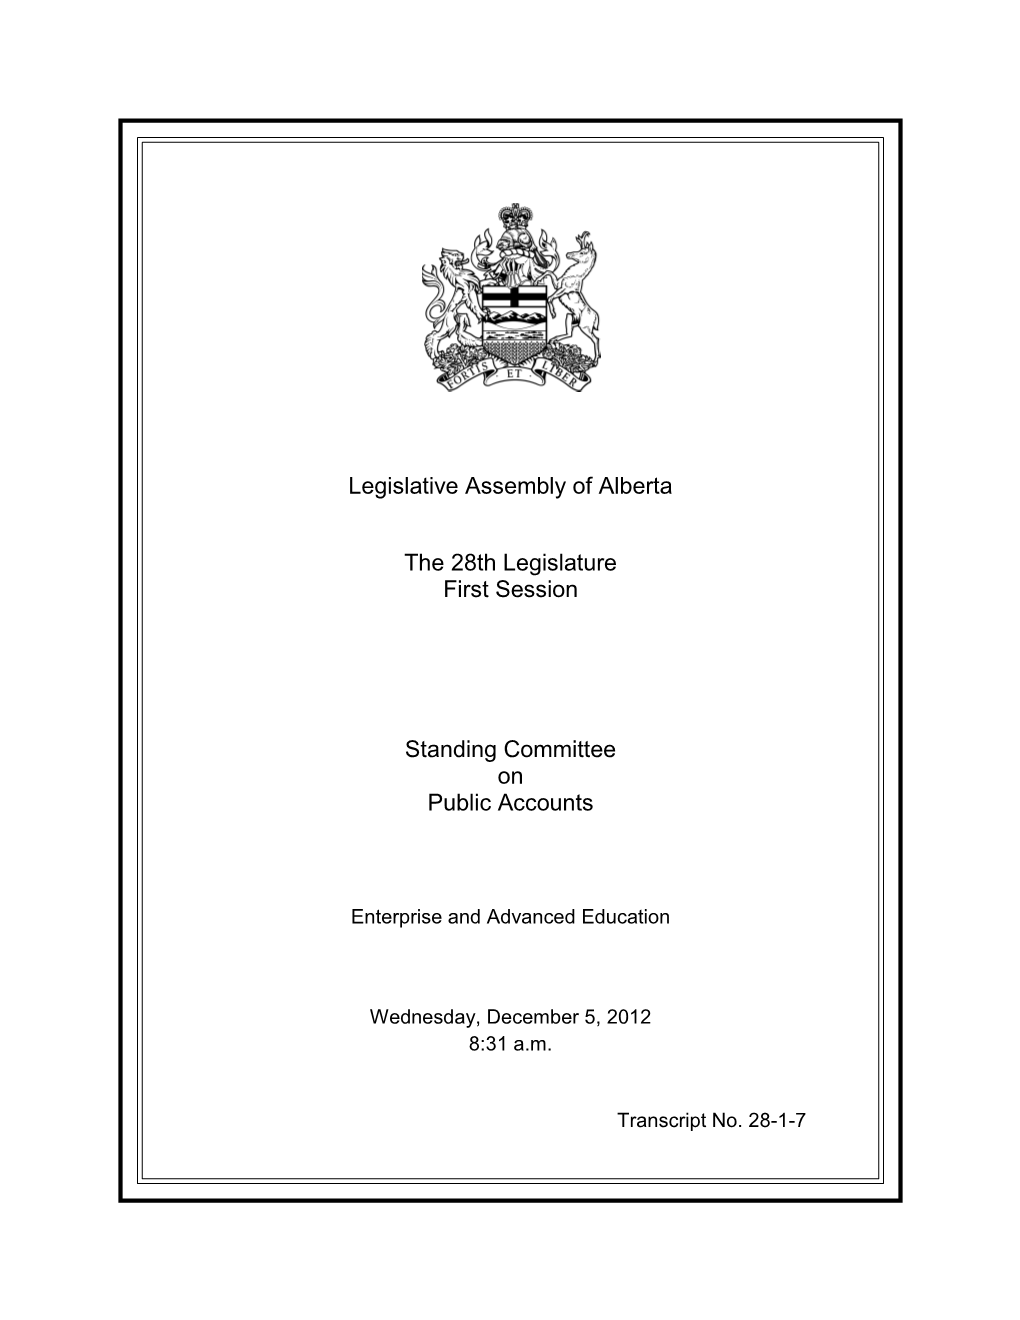 Legislative Assembly of Alberta the 28Th Legislature First Session Standing Committee on Public Accounts